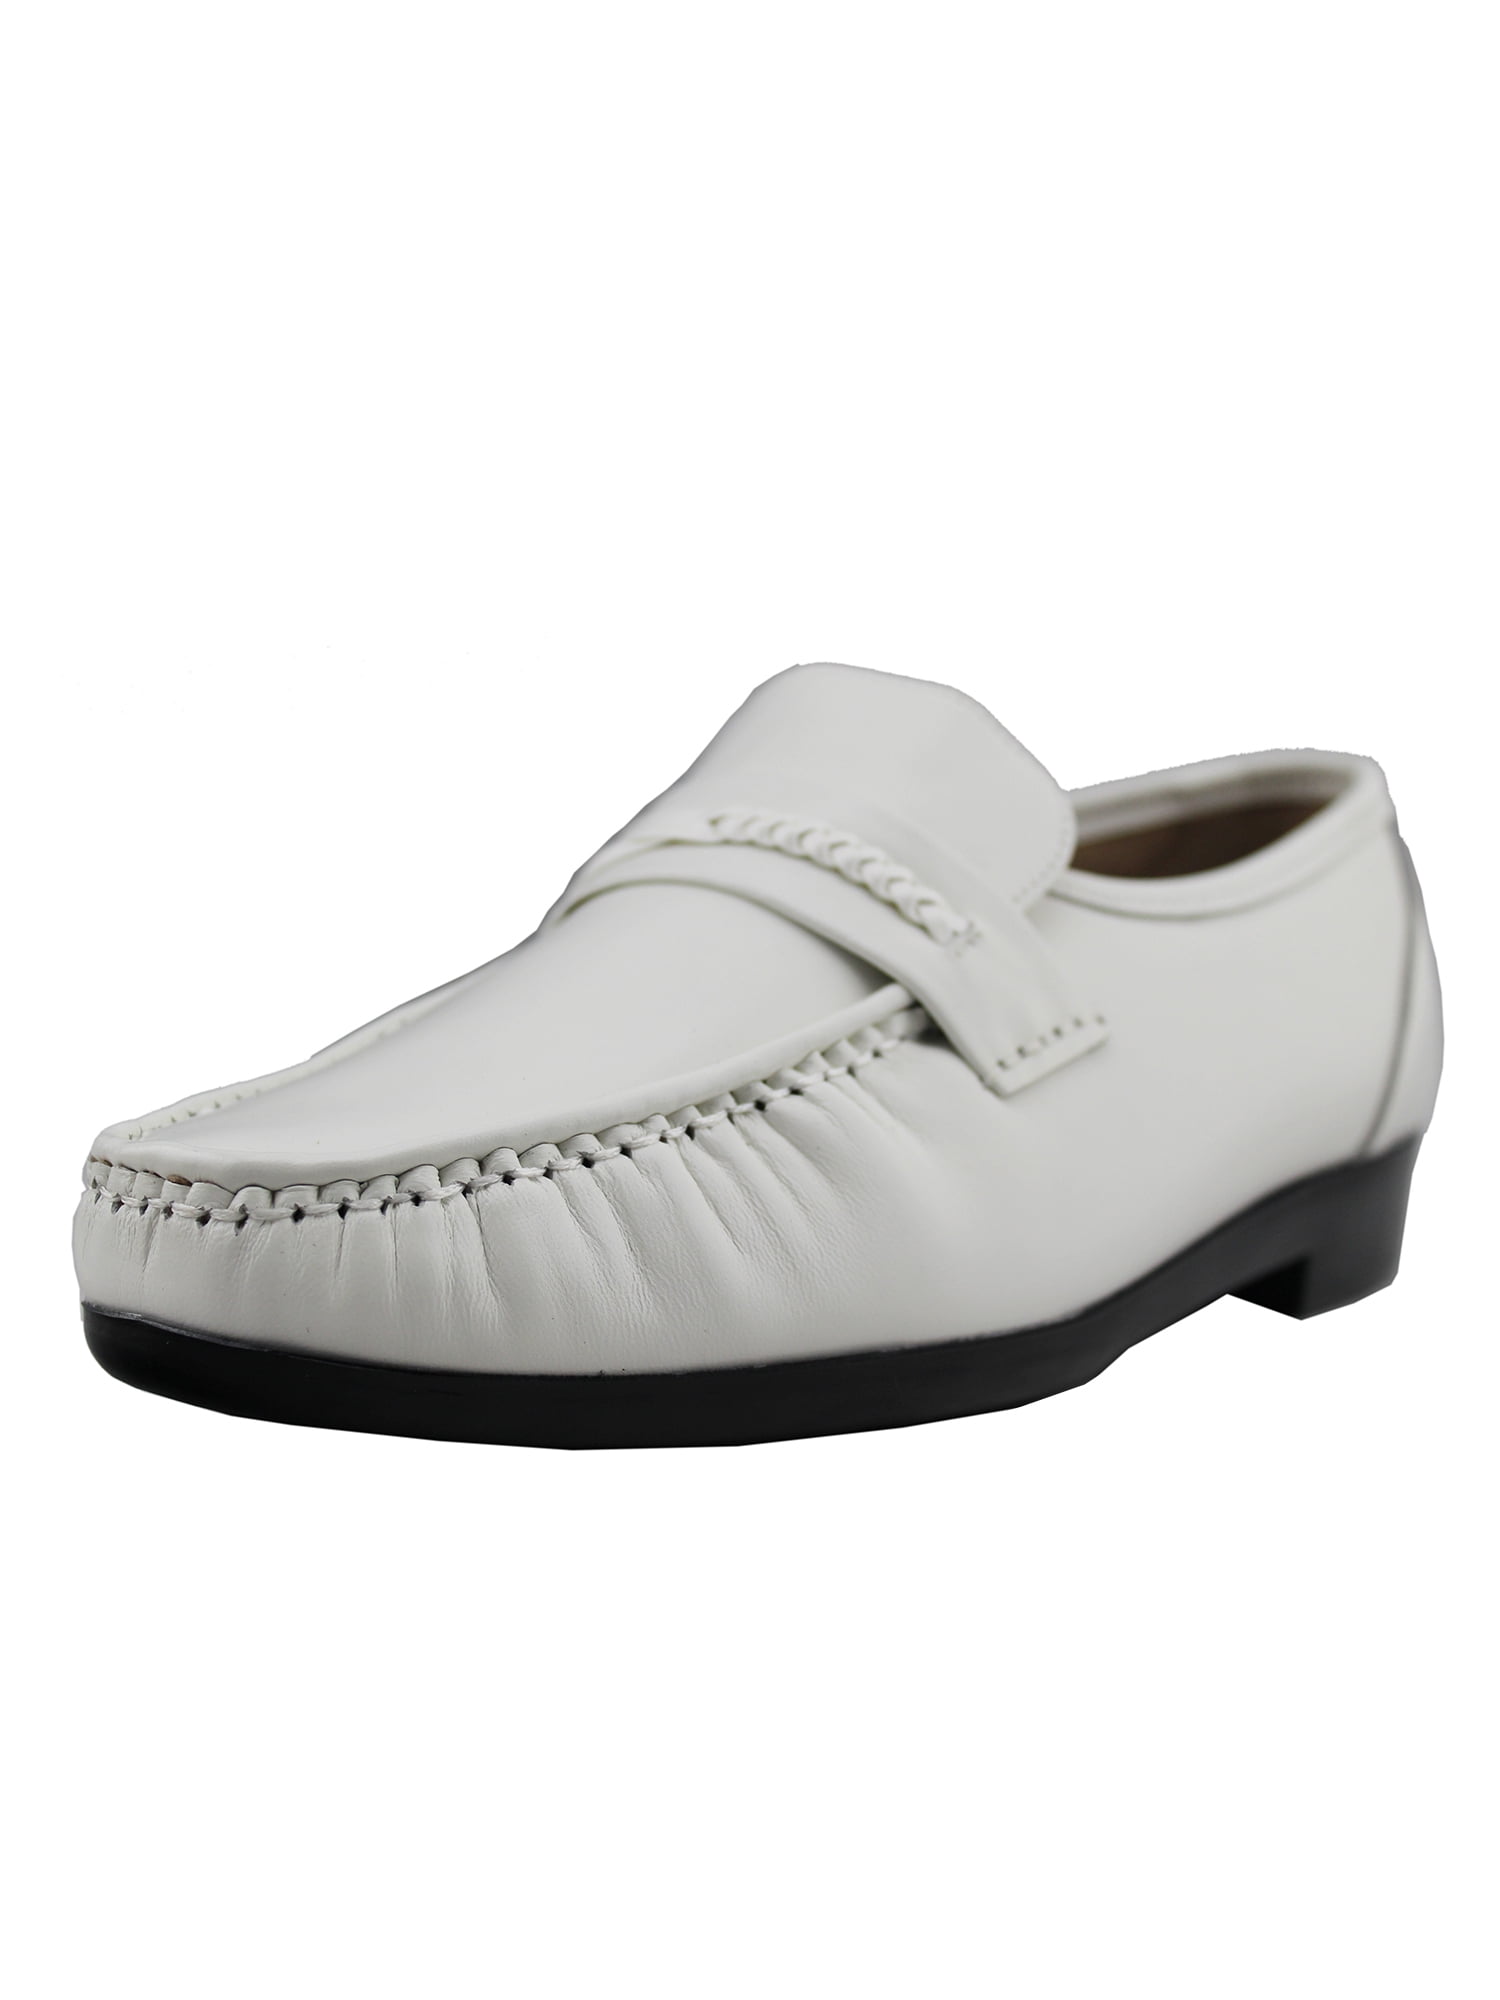 mens casual slip on shoes wide width